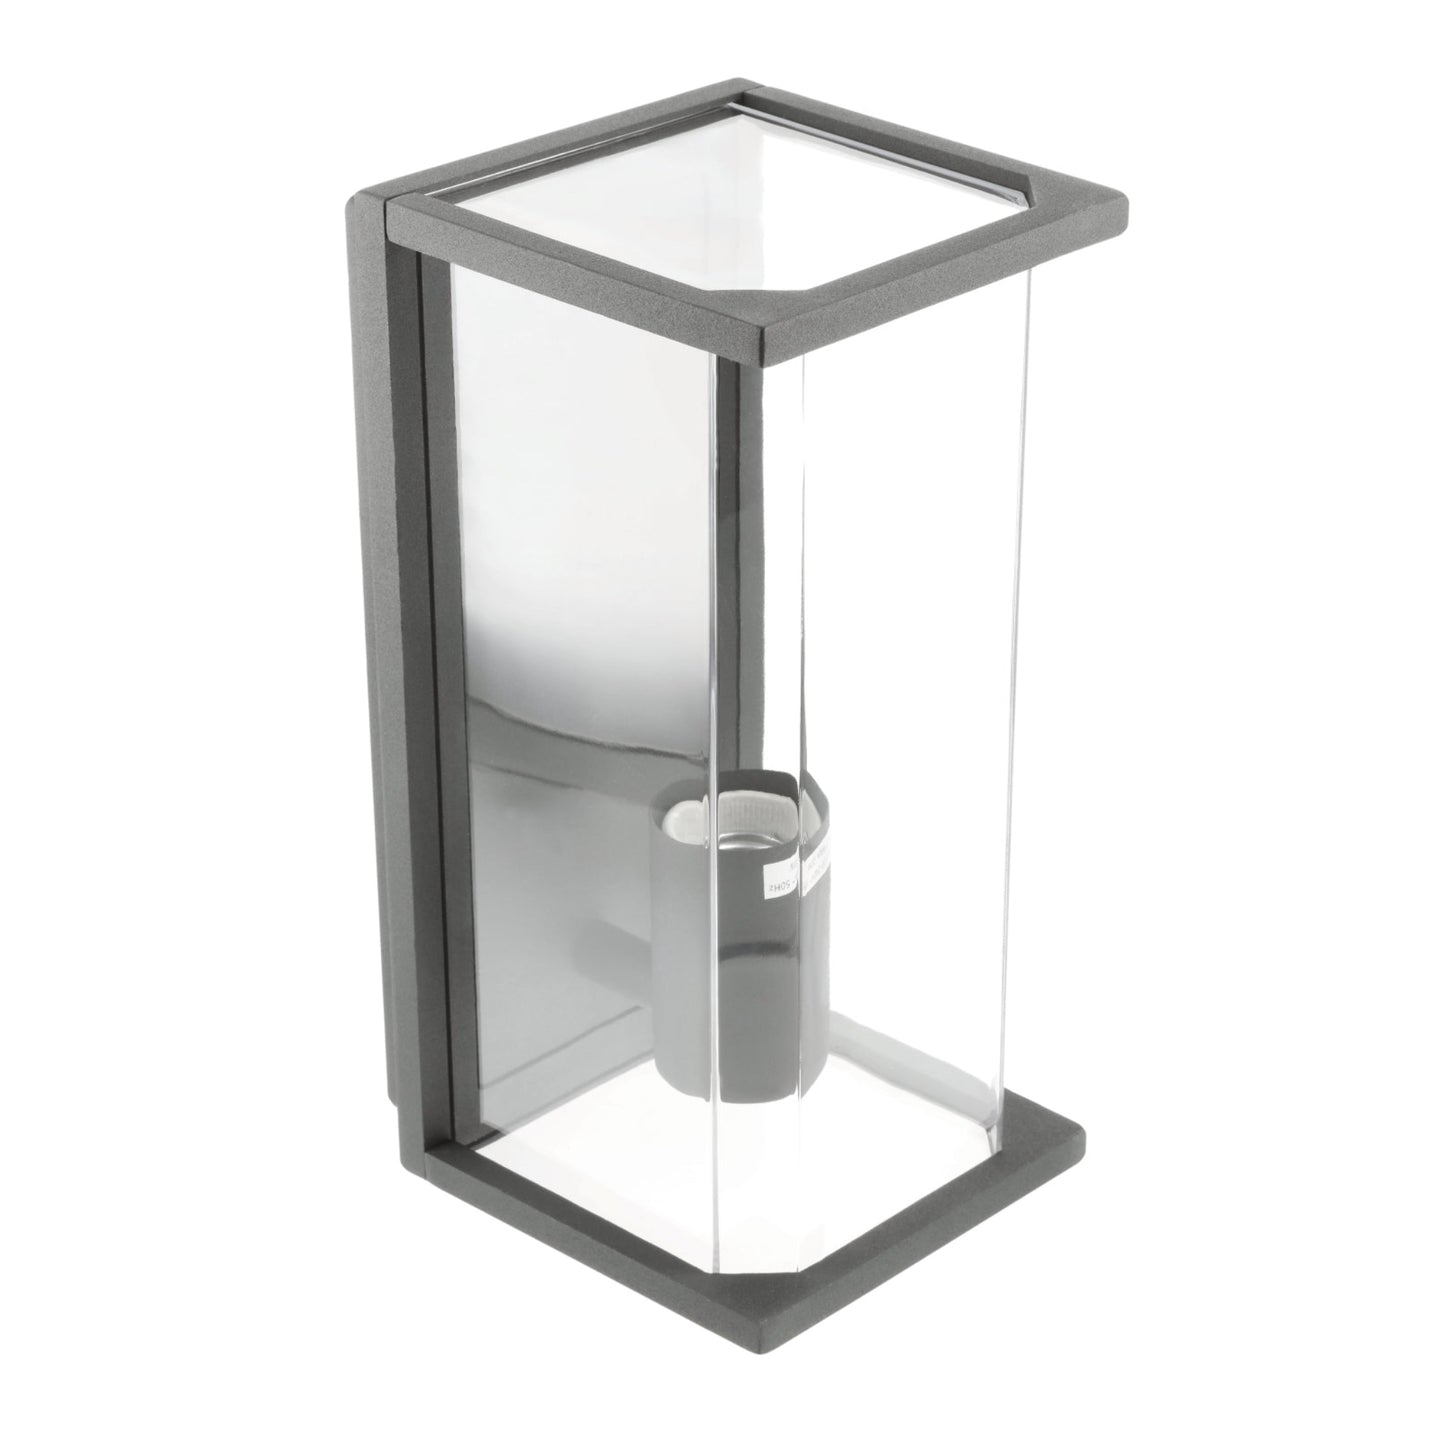 CGC ADRIANA Anthracite Grey E27 Outdoor Wall Light Lantern Clear Diffuser IP54